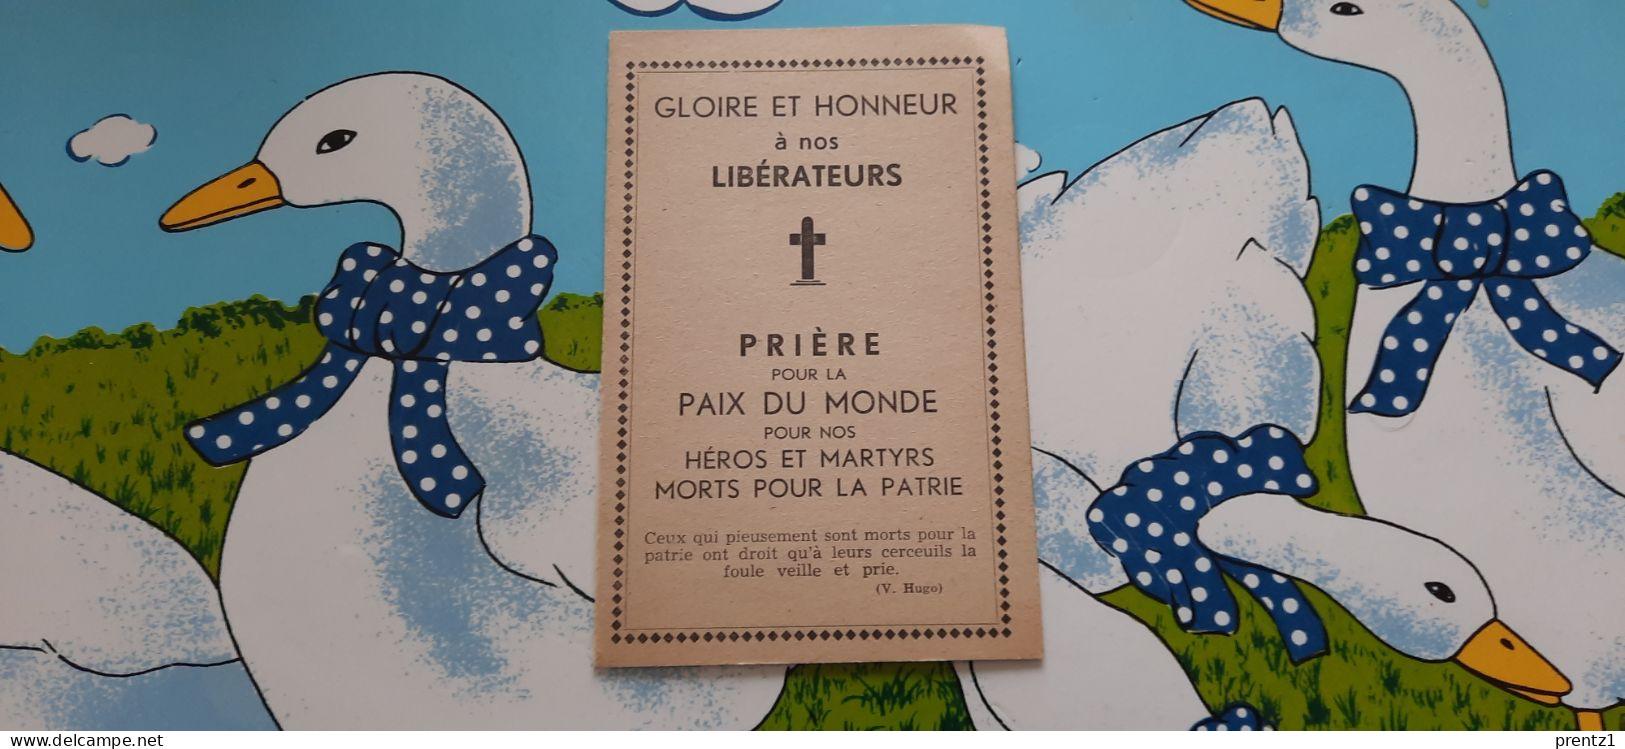 Glory And Honour To Our Liberator - Prayer For Peace Of The World For Our Heroes And Martyrs Who Died For Their Country - Images Religieuses